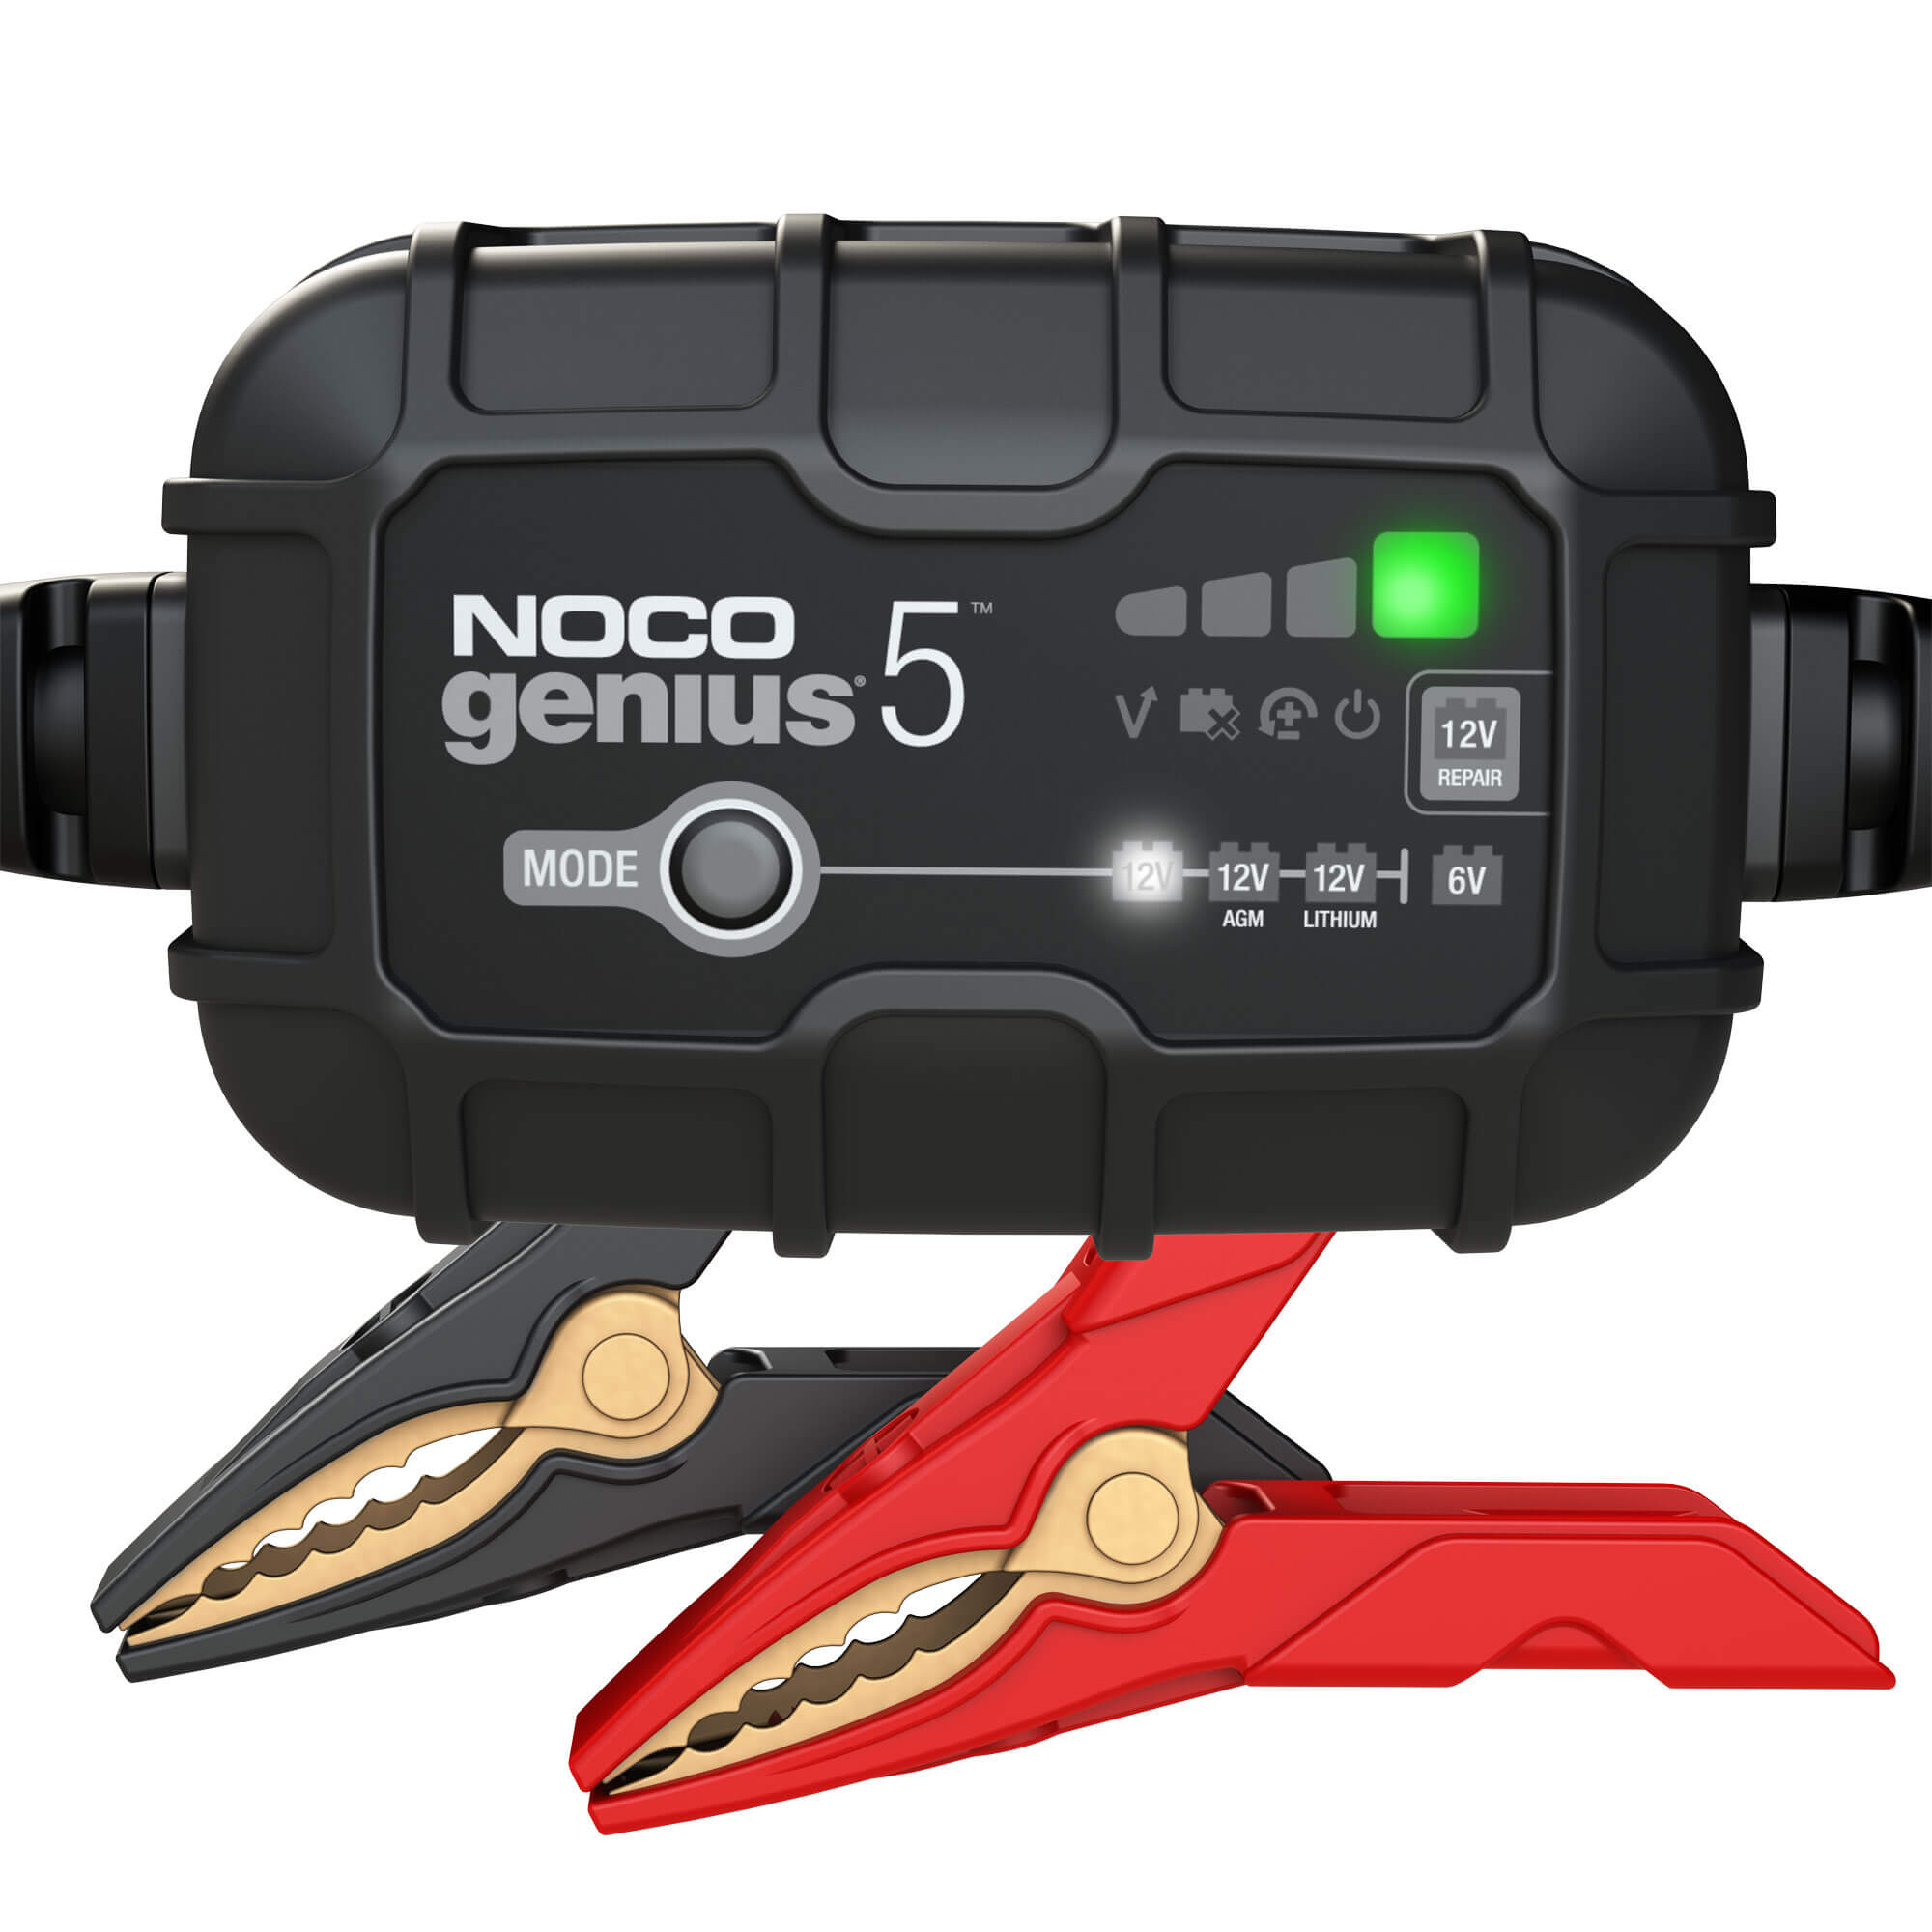 NOCO Genius5 6V/5-Amp Smart Battery Charger